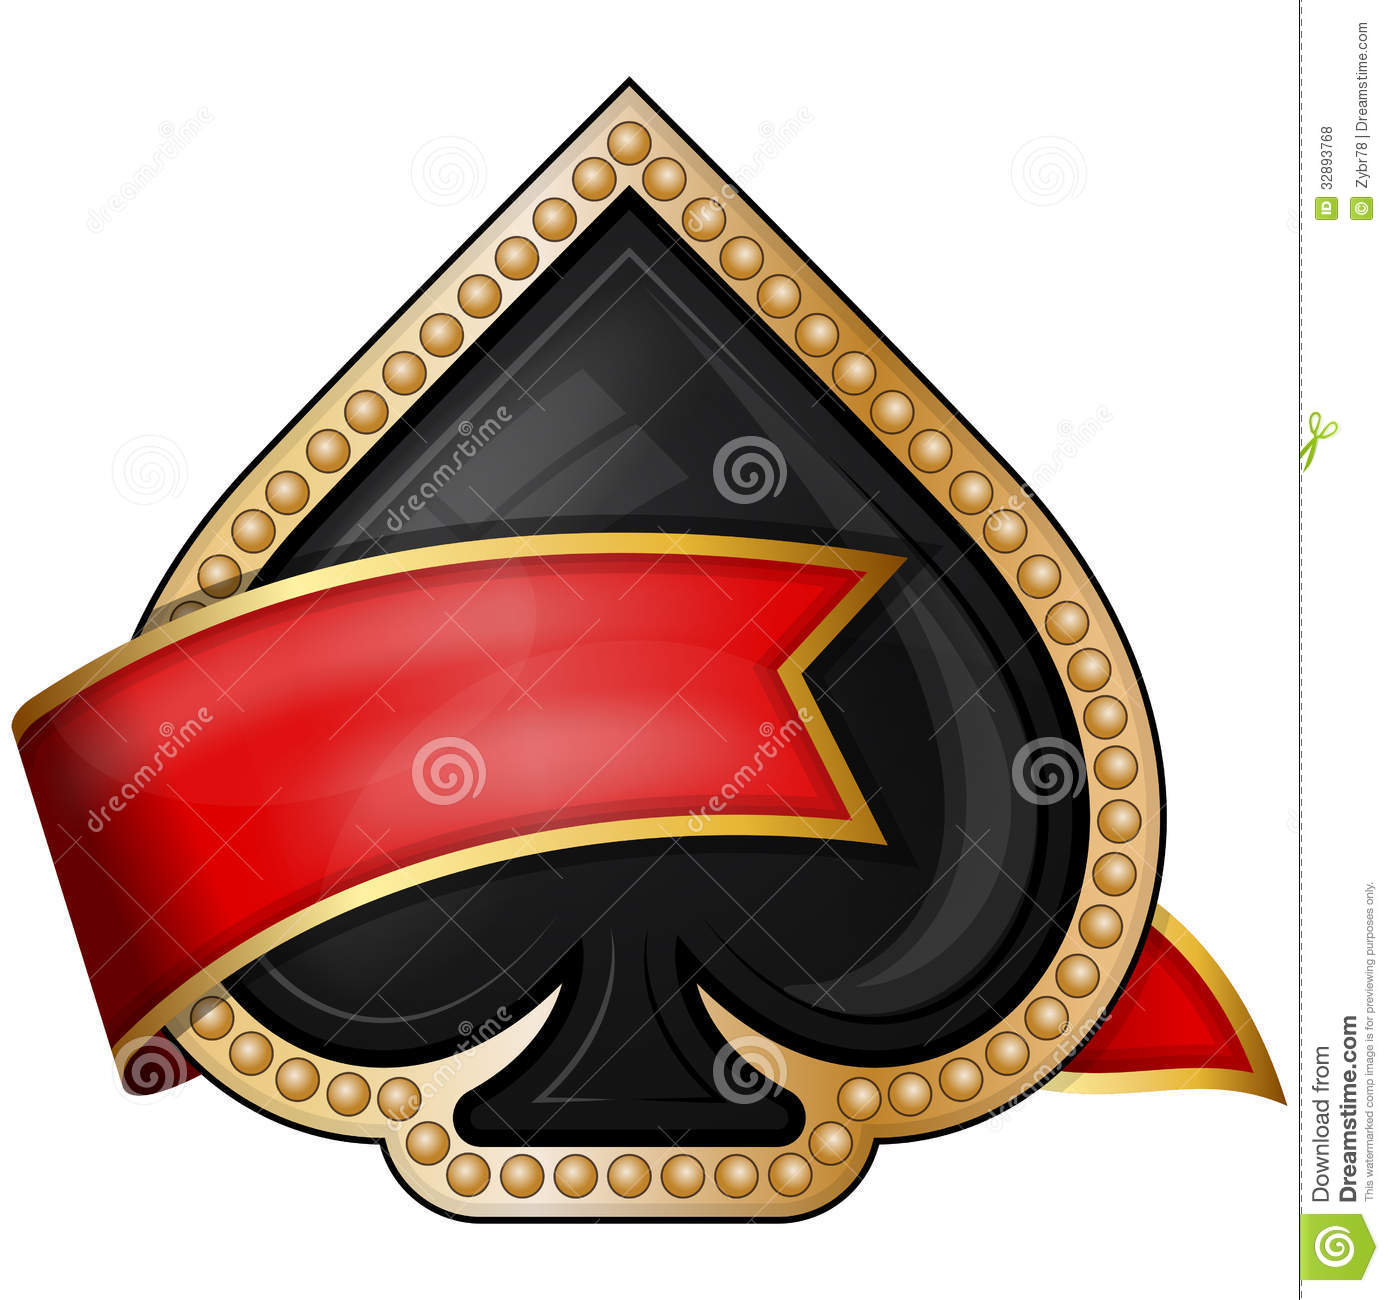 Spades  Card Suit Icons With Ribbon Royalty Free Stock Photos   Image    